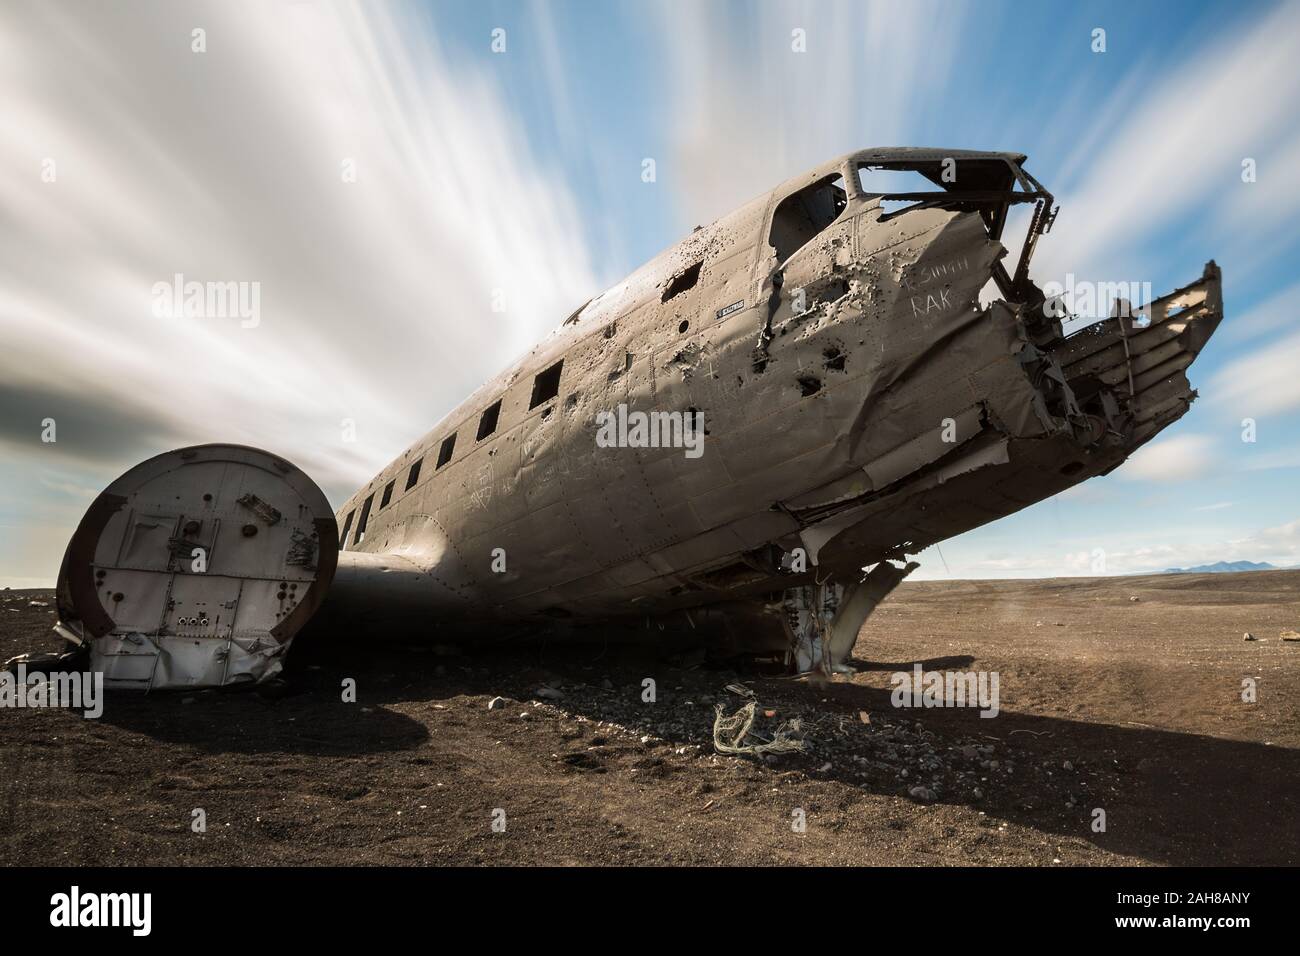 Low angle view of an abandoned DC-3 plane lying in the icelandic desert, against a blue summer sky with trailing clouds Stock Photo